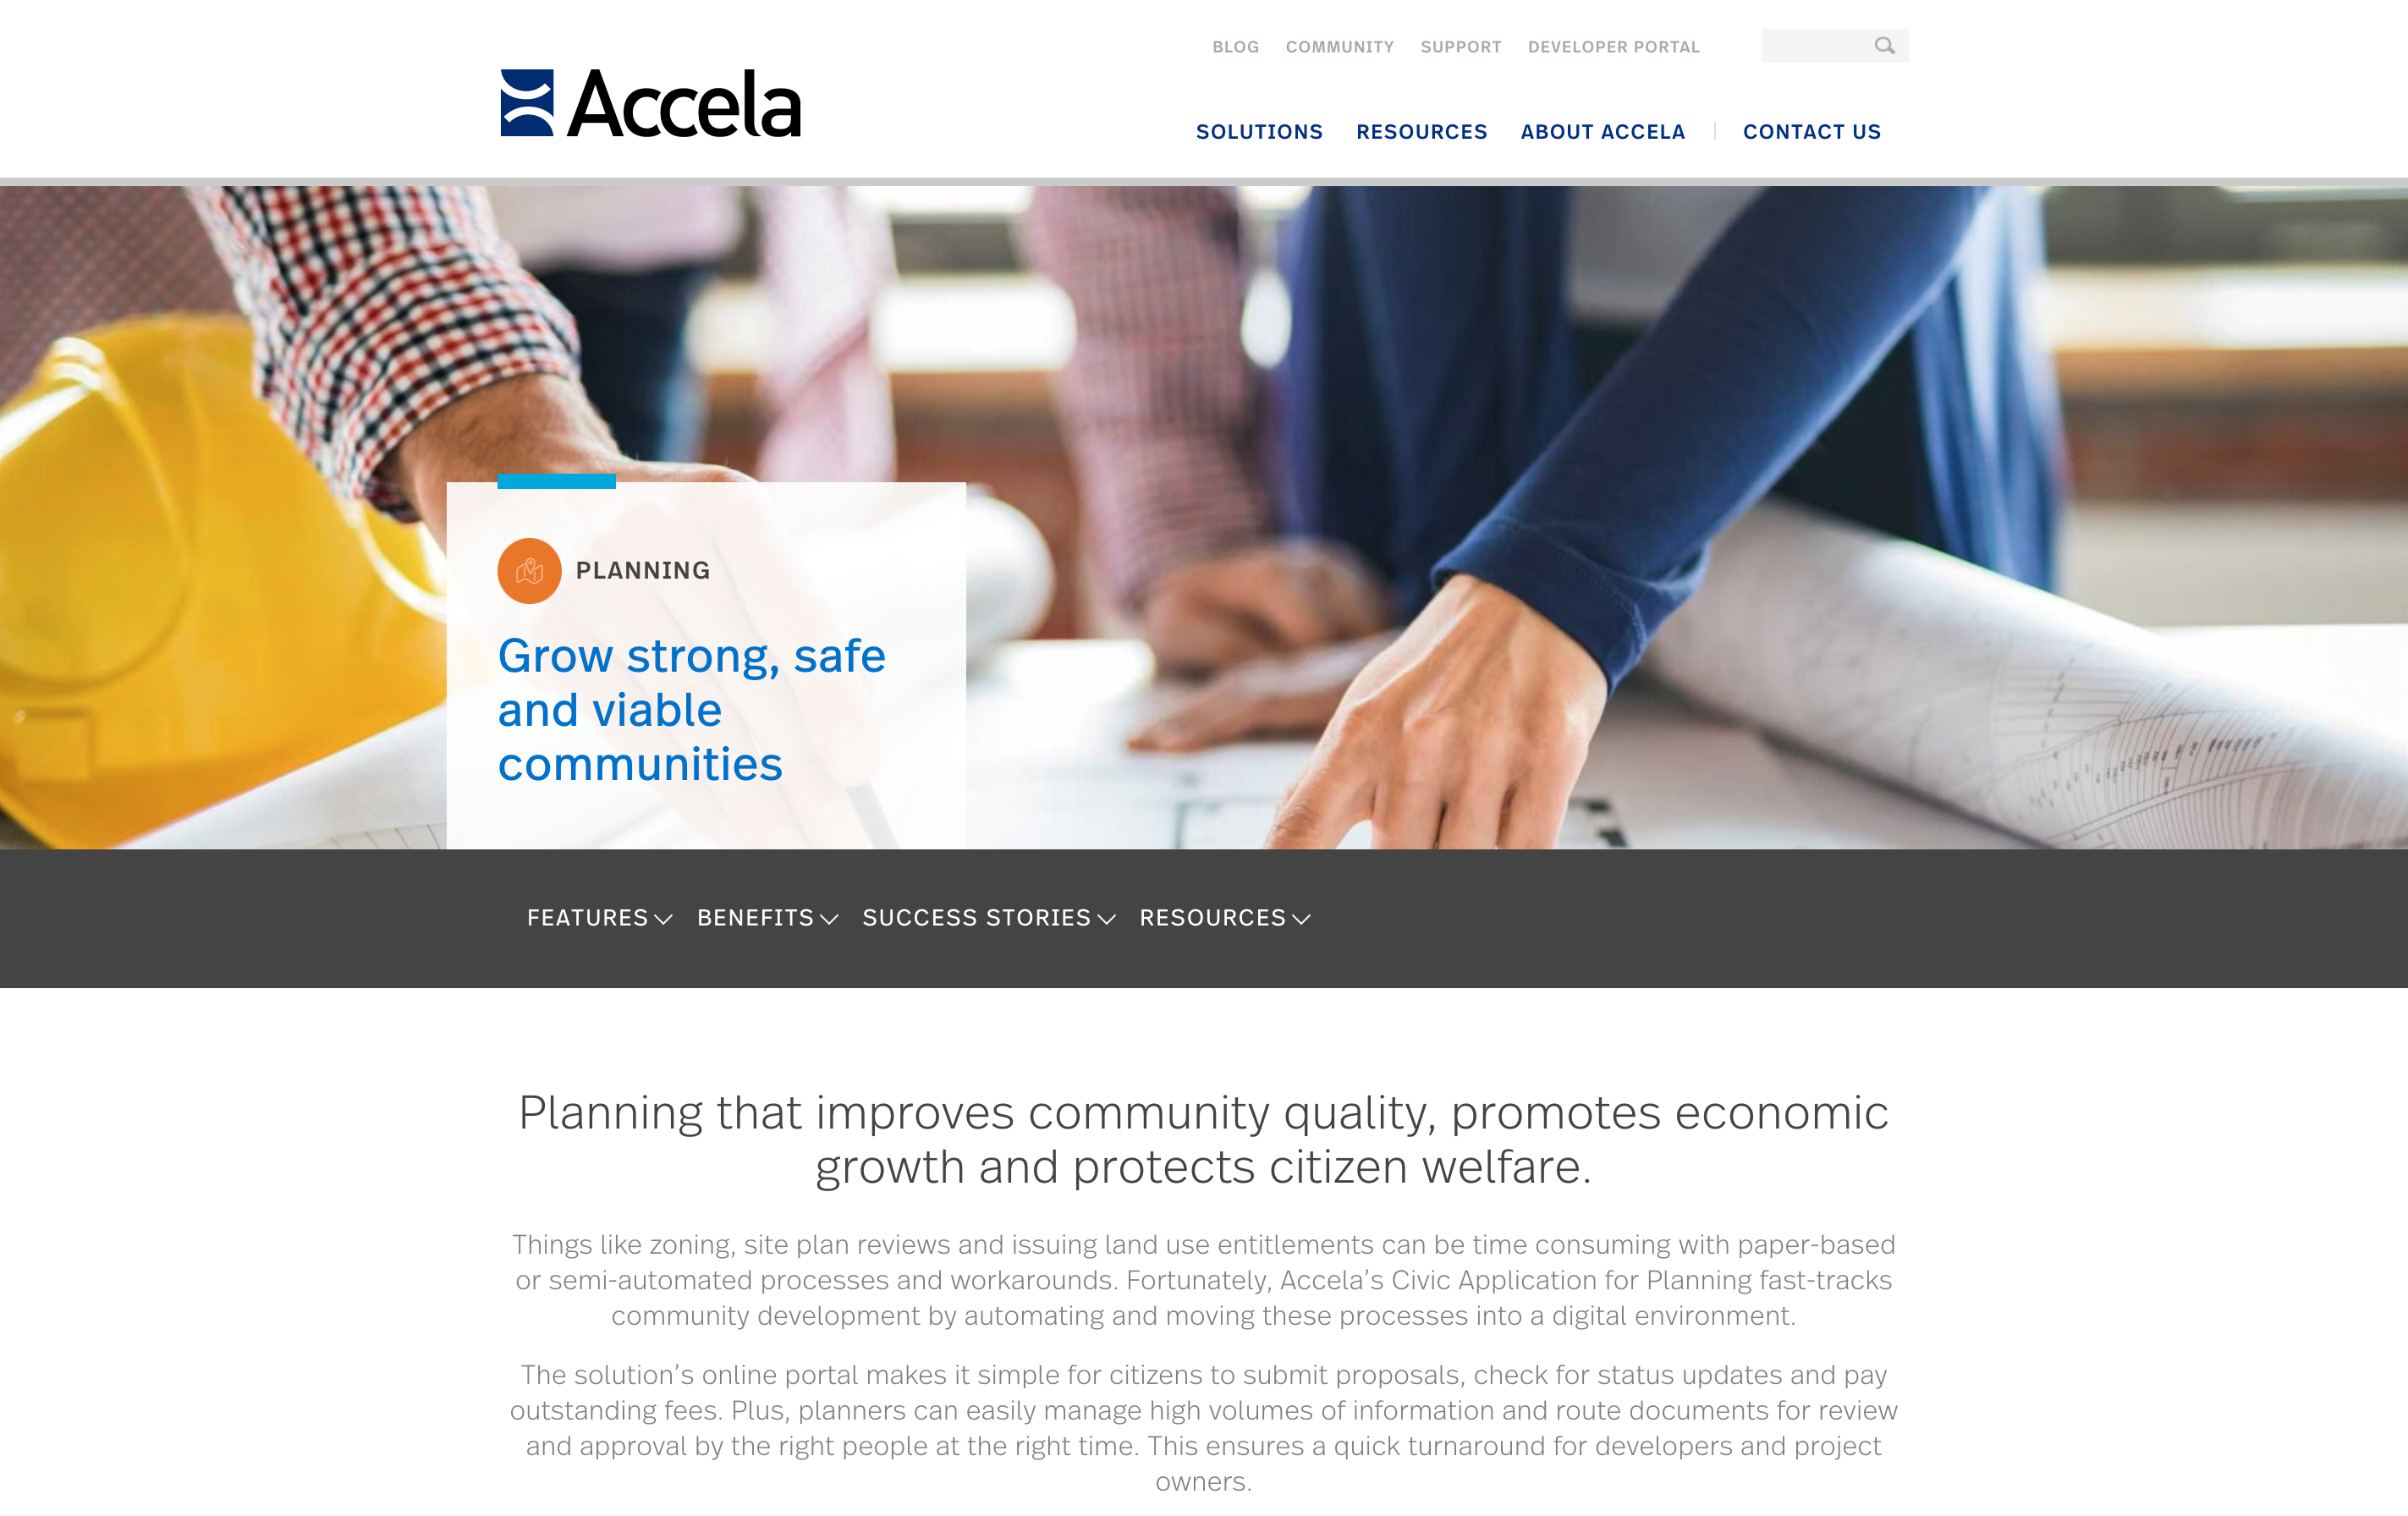 Accela Planning Solution